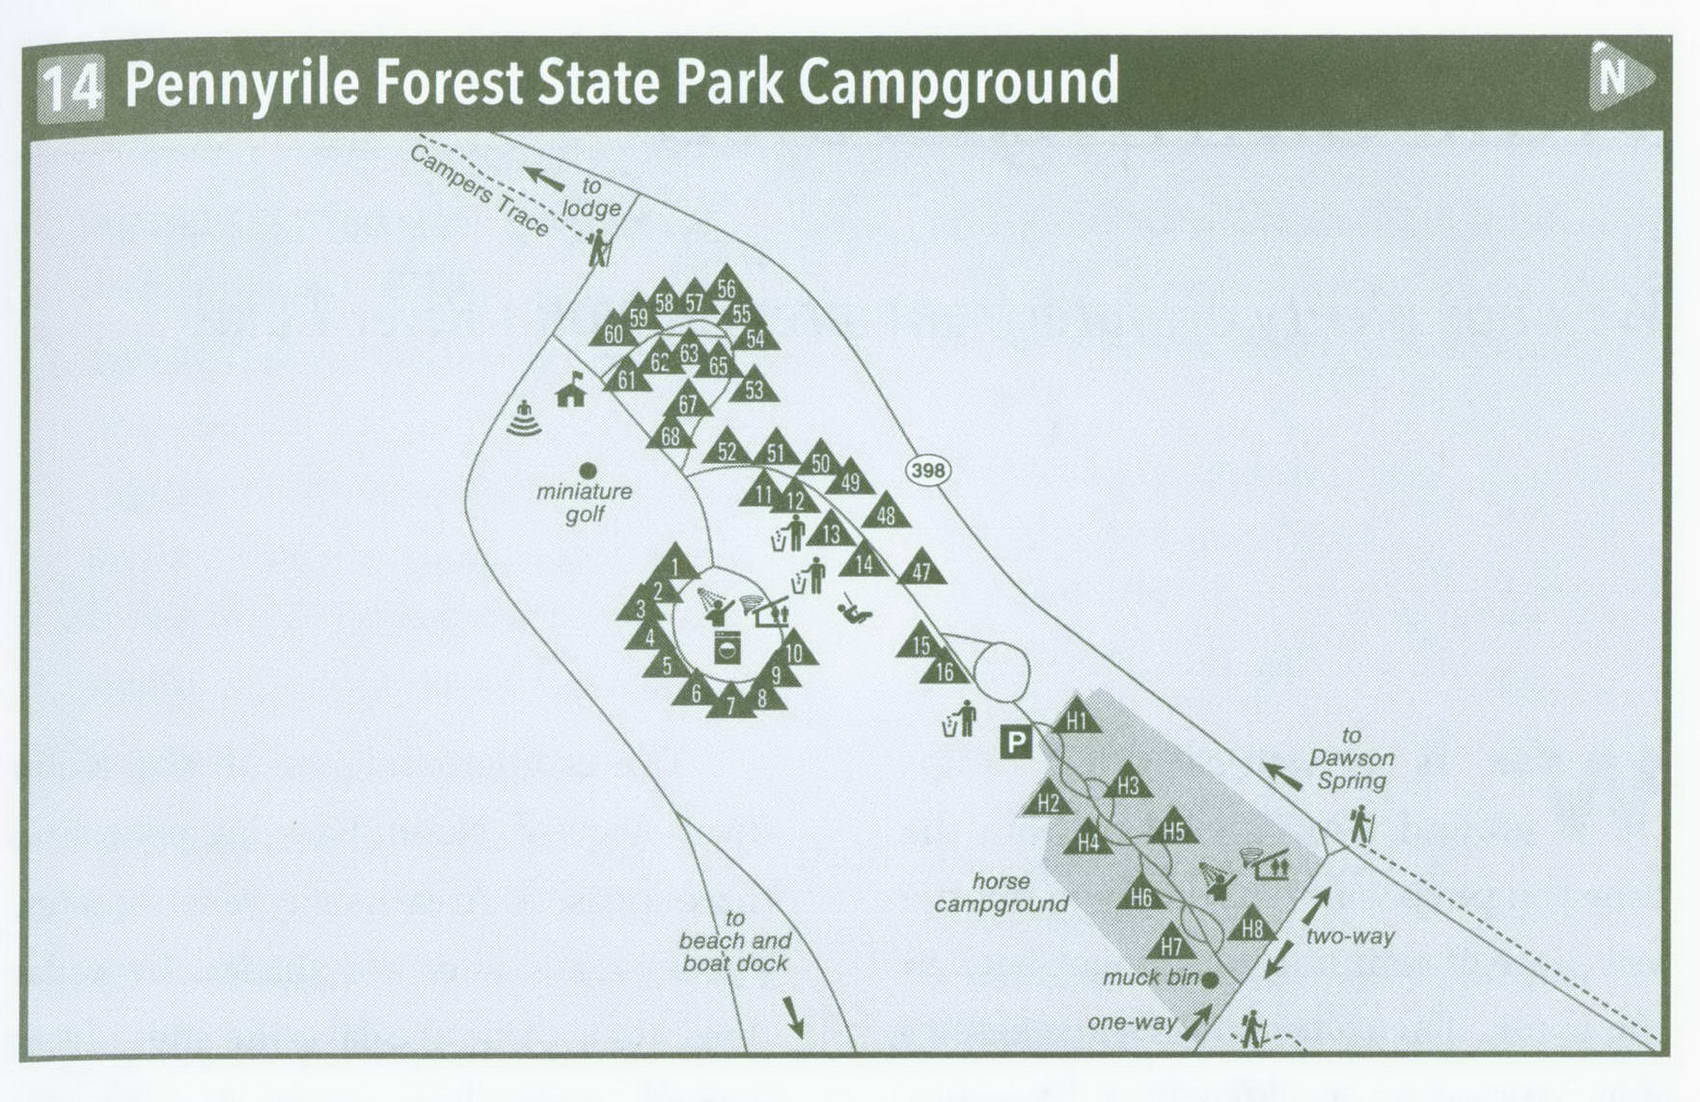 Plan of Pennyrile Forest State Park Campground